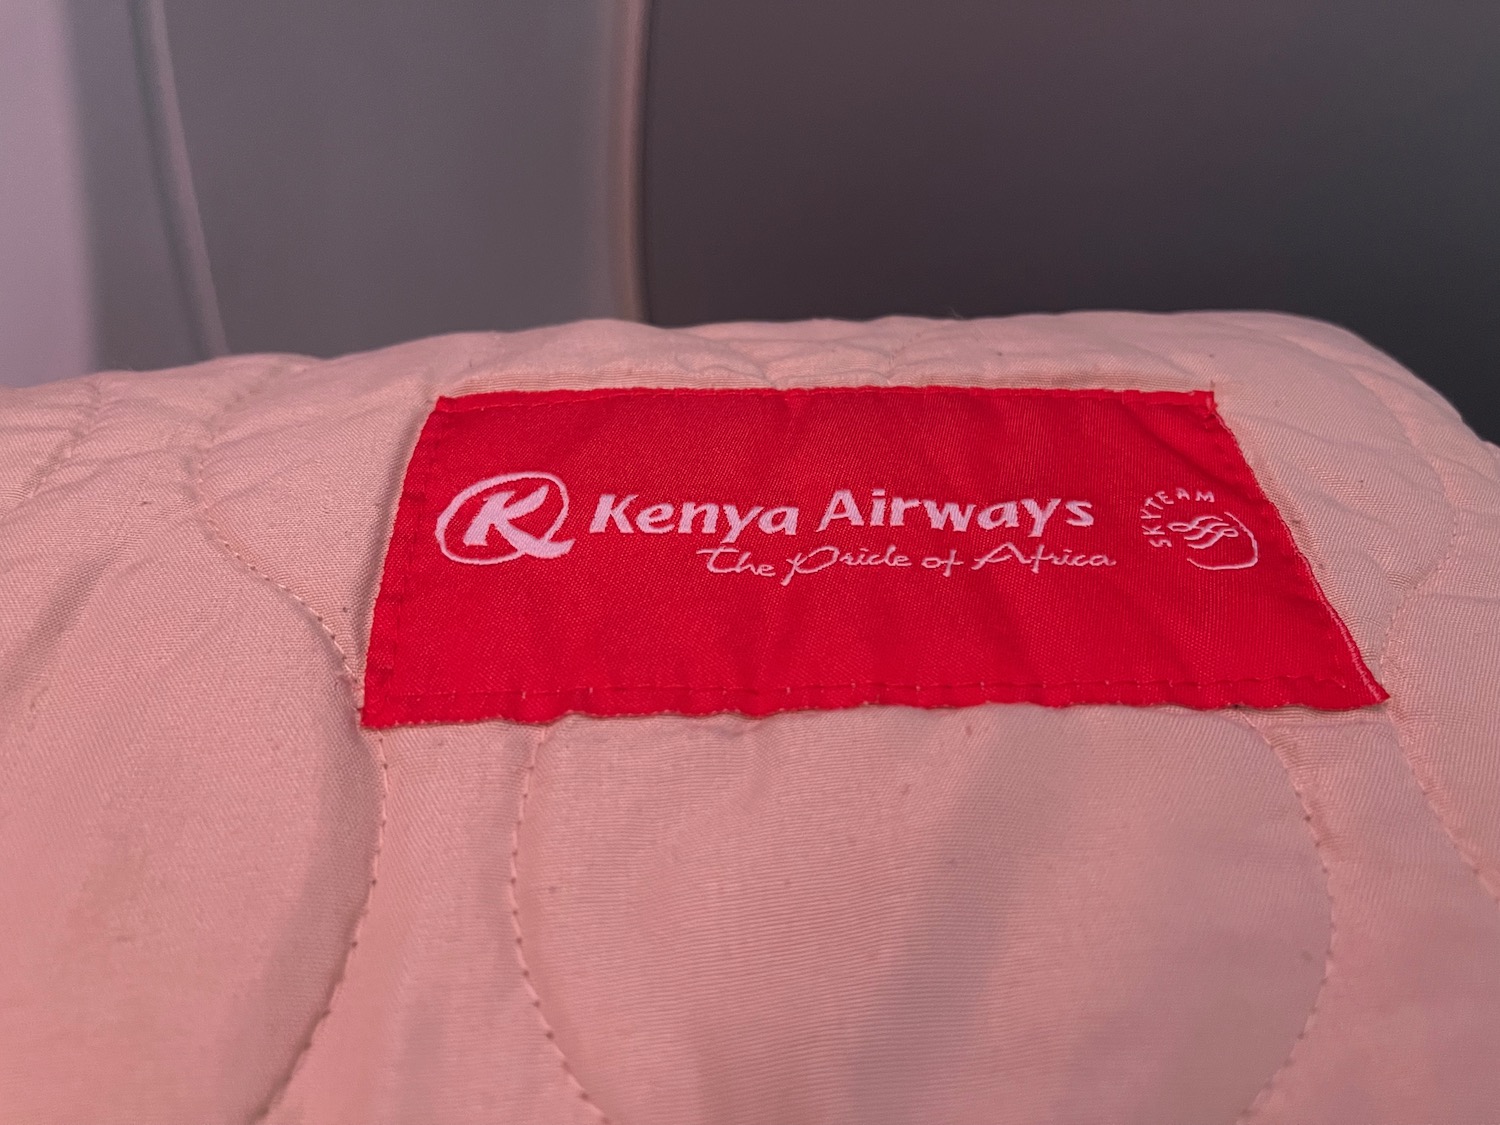 a red label on a pink blanket